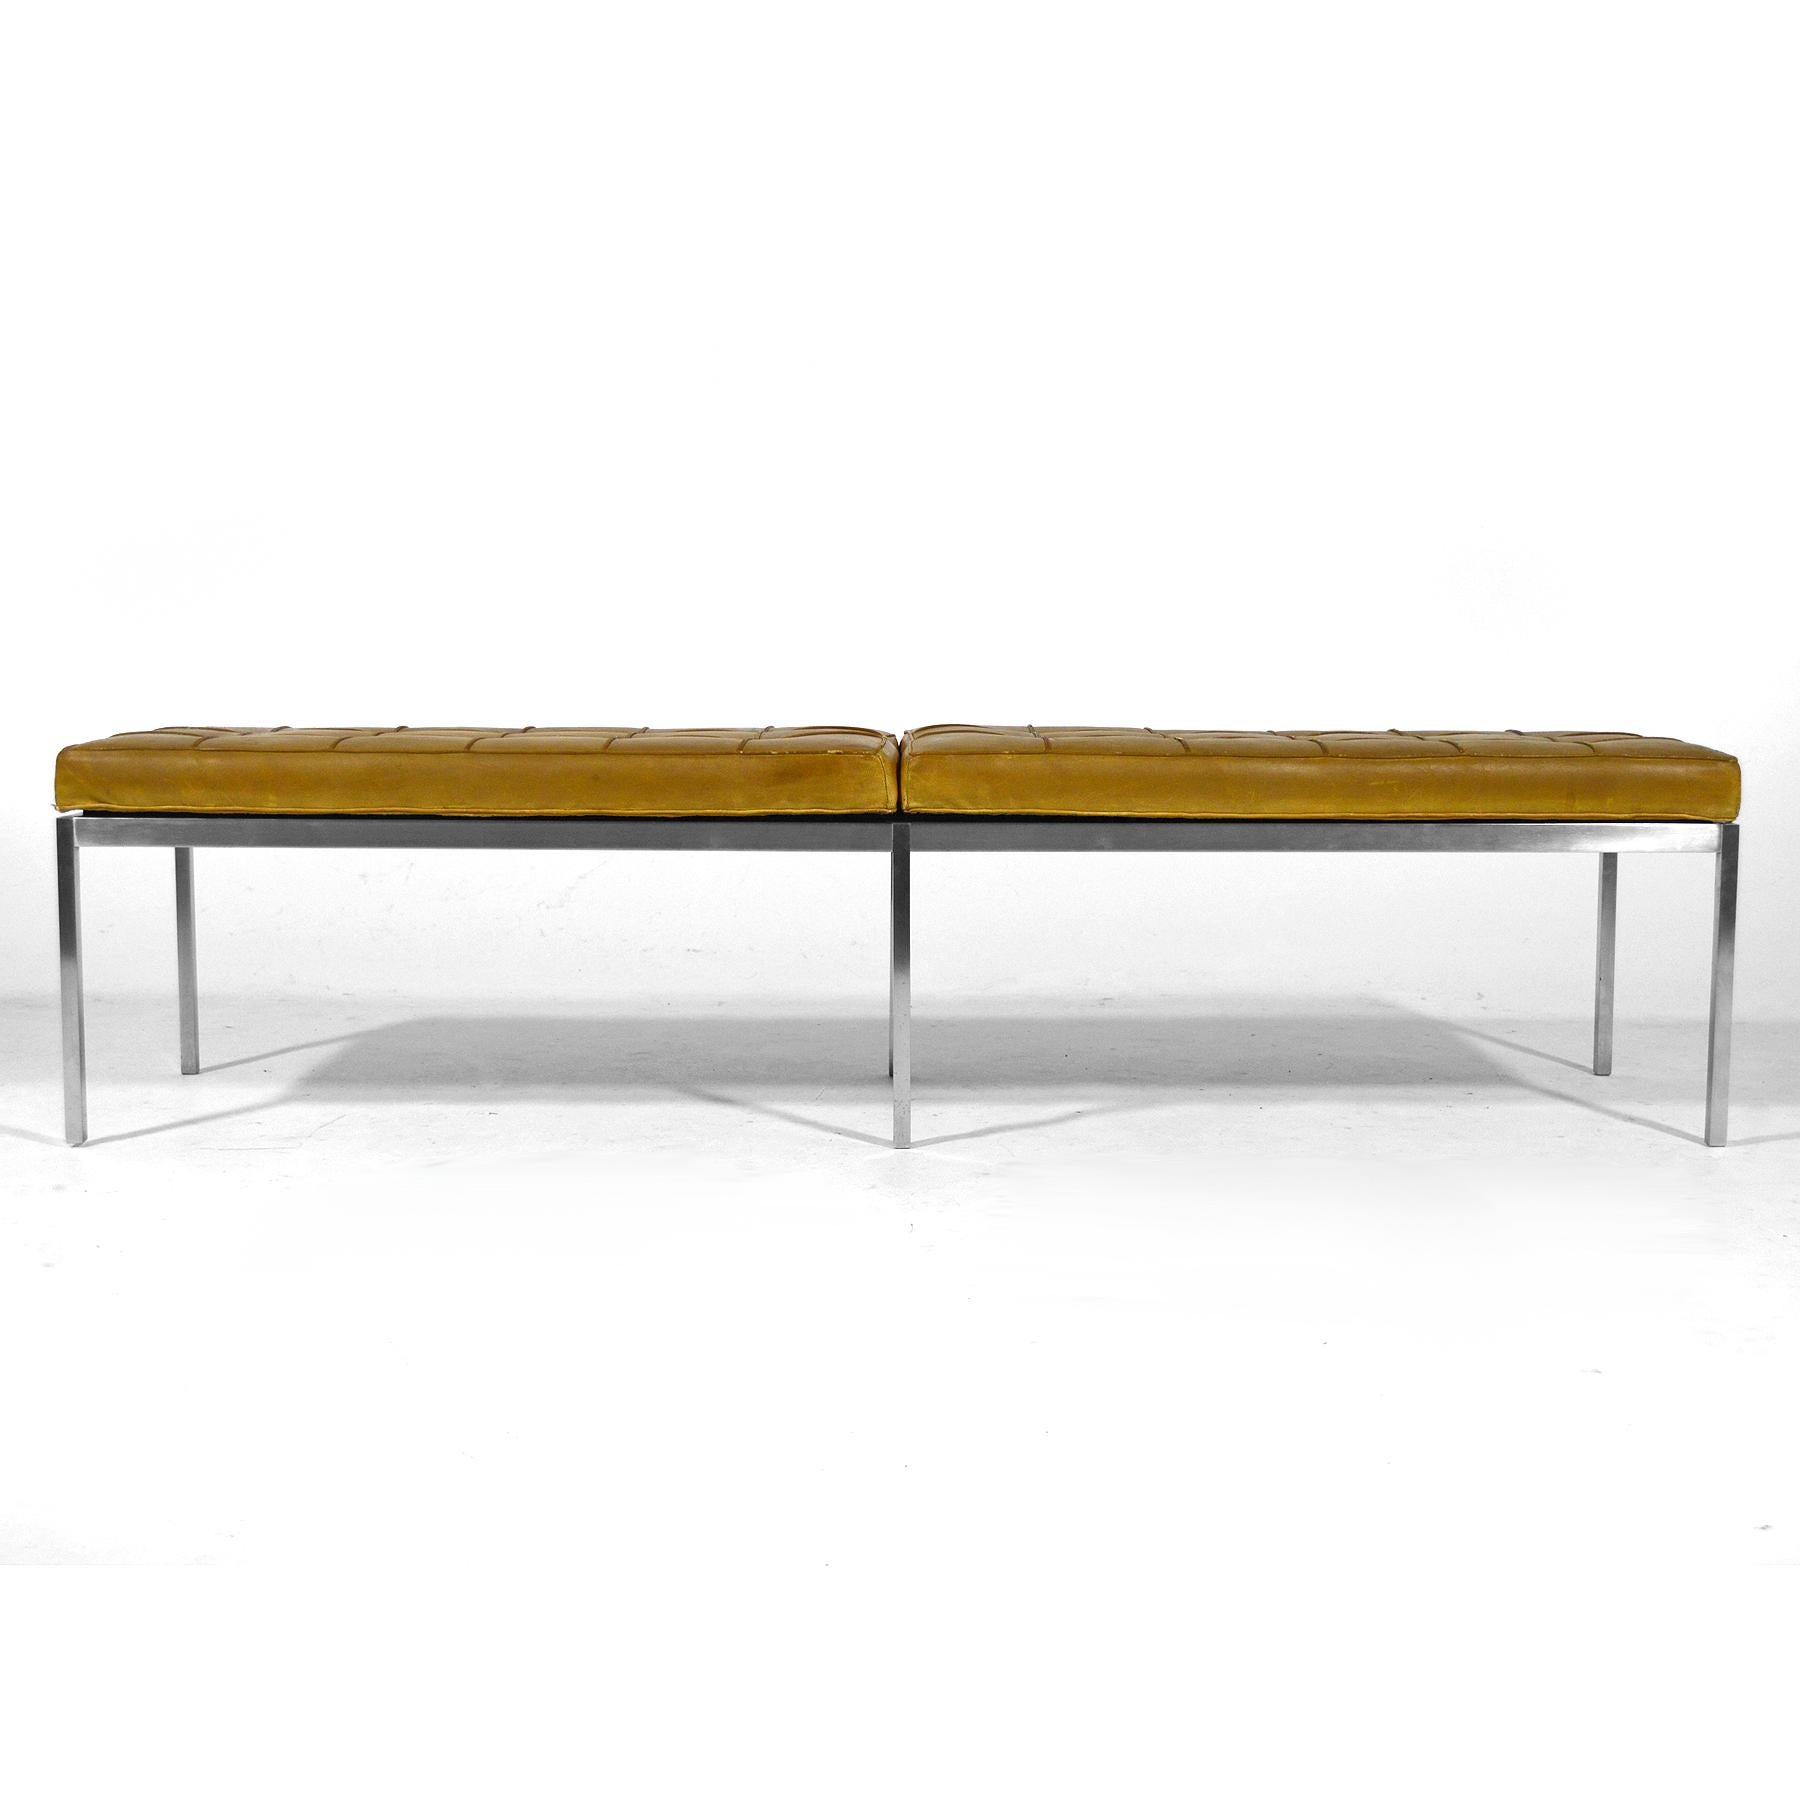 American Florence Knoll Leather Bench